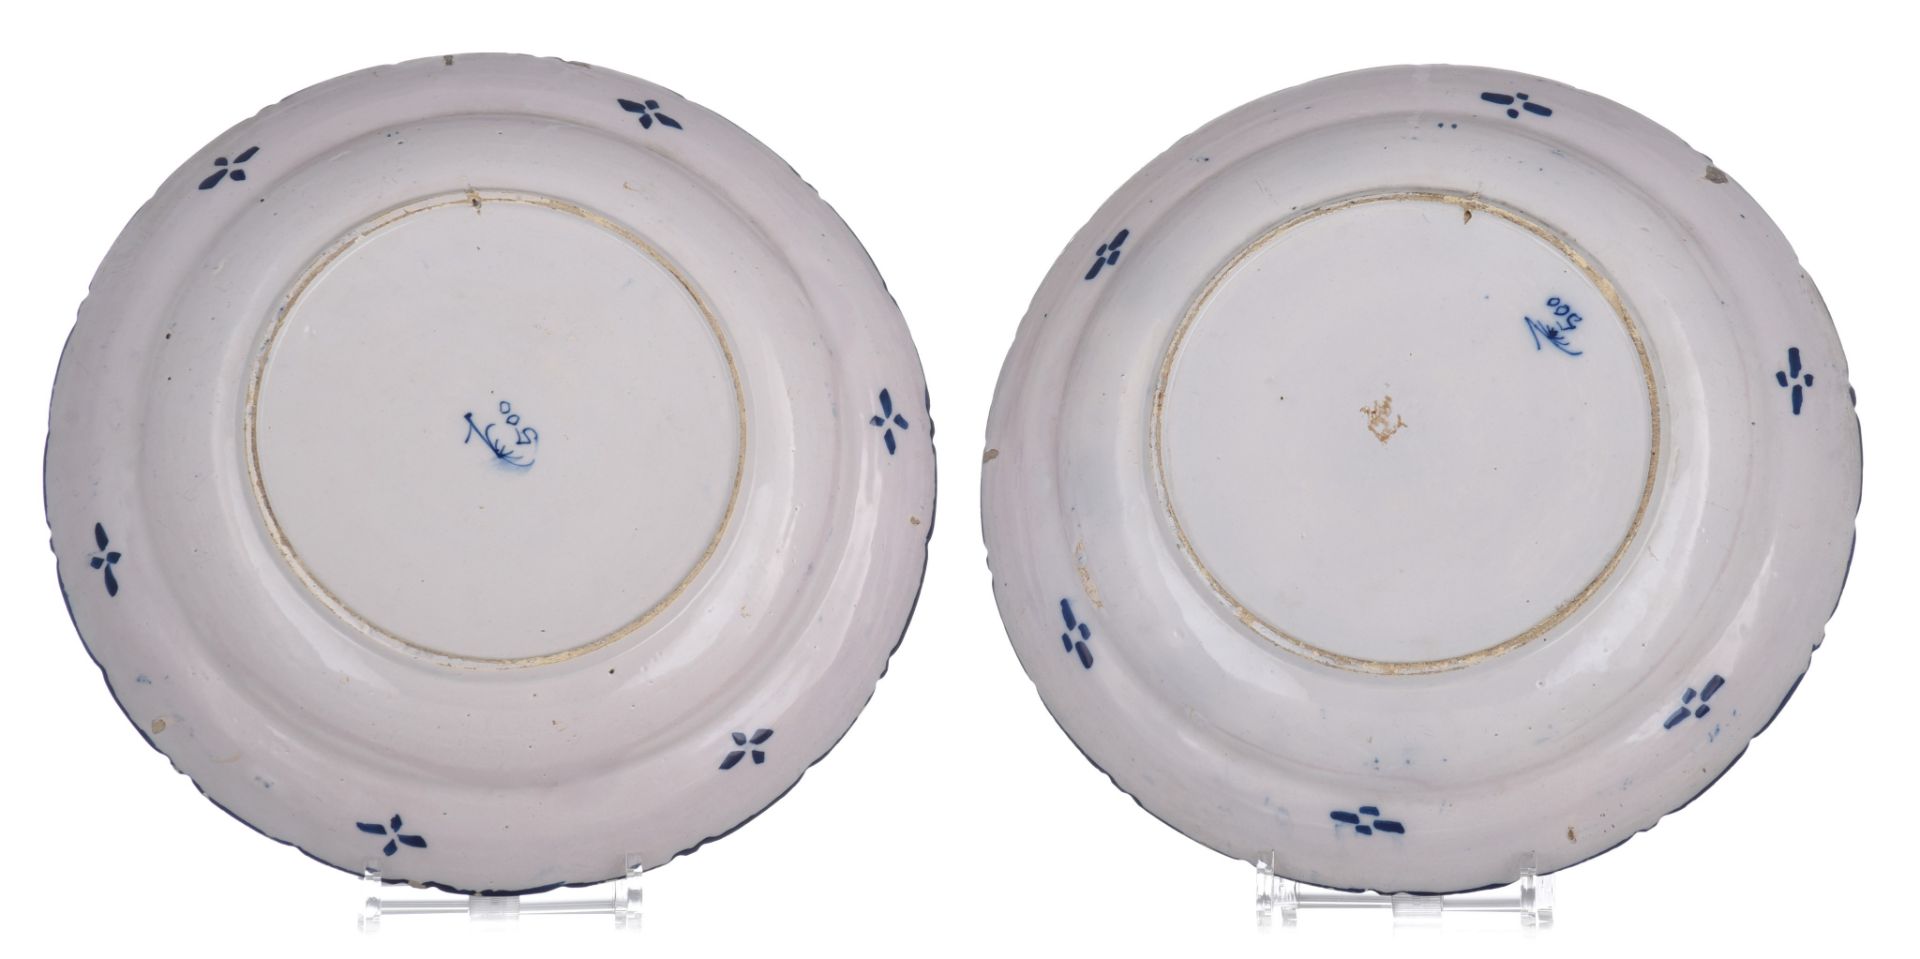 A collection of six Delft blue and white flower basket chargers, marked 'De Klauw', 18thC, ¯ 35 cm - Image 3 of 10